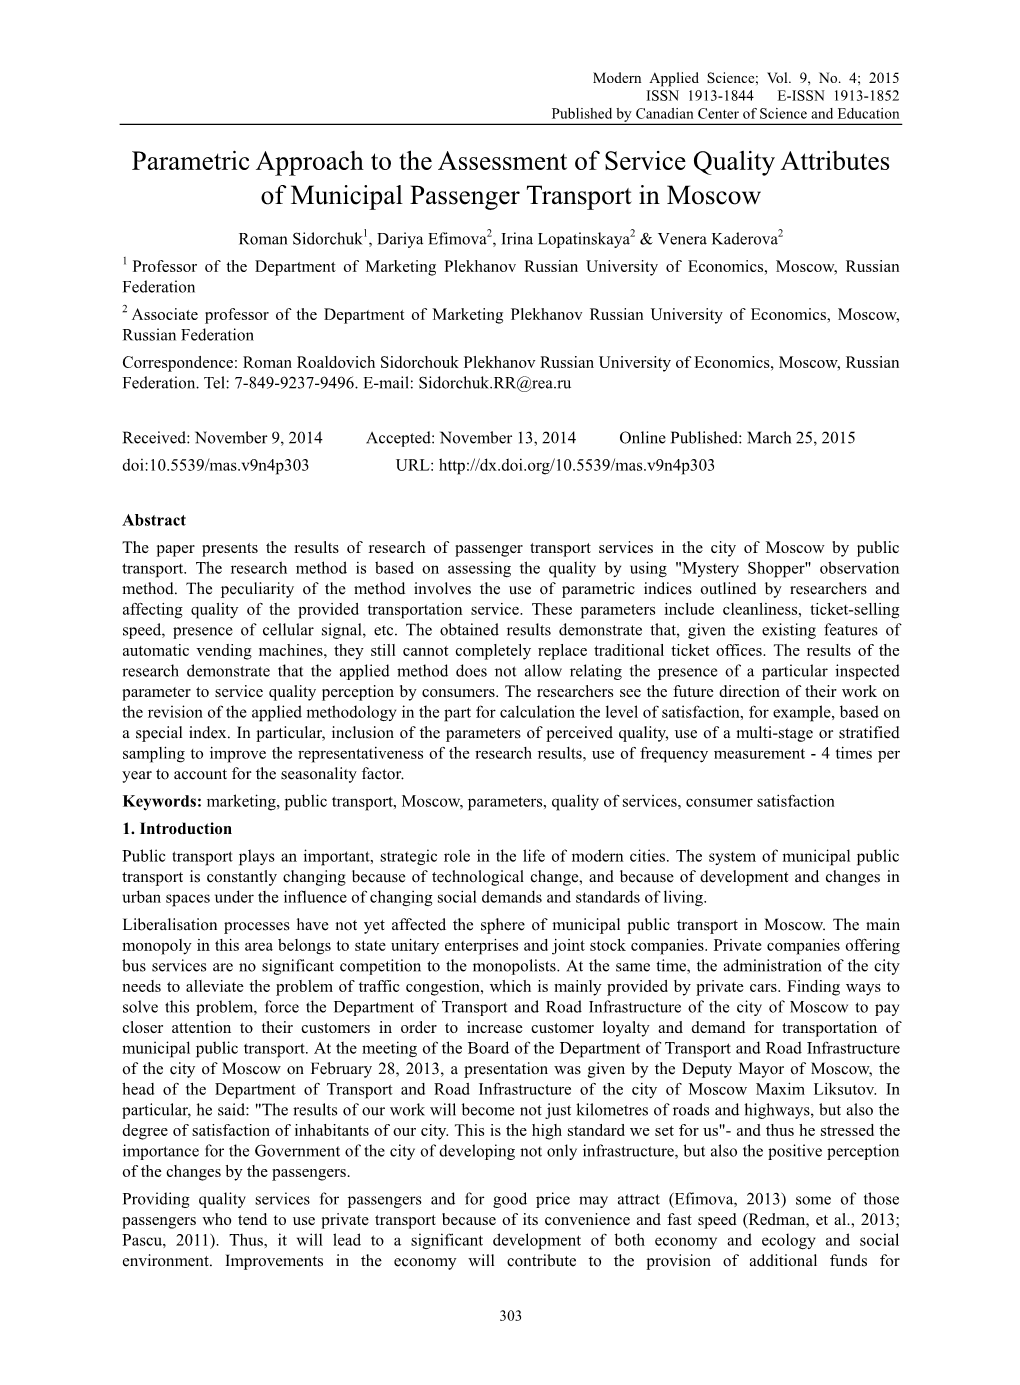 Parametric Approach to the Assessment of Service Quality Attributes of Municipal Passenger Transport in Moscow